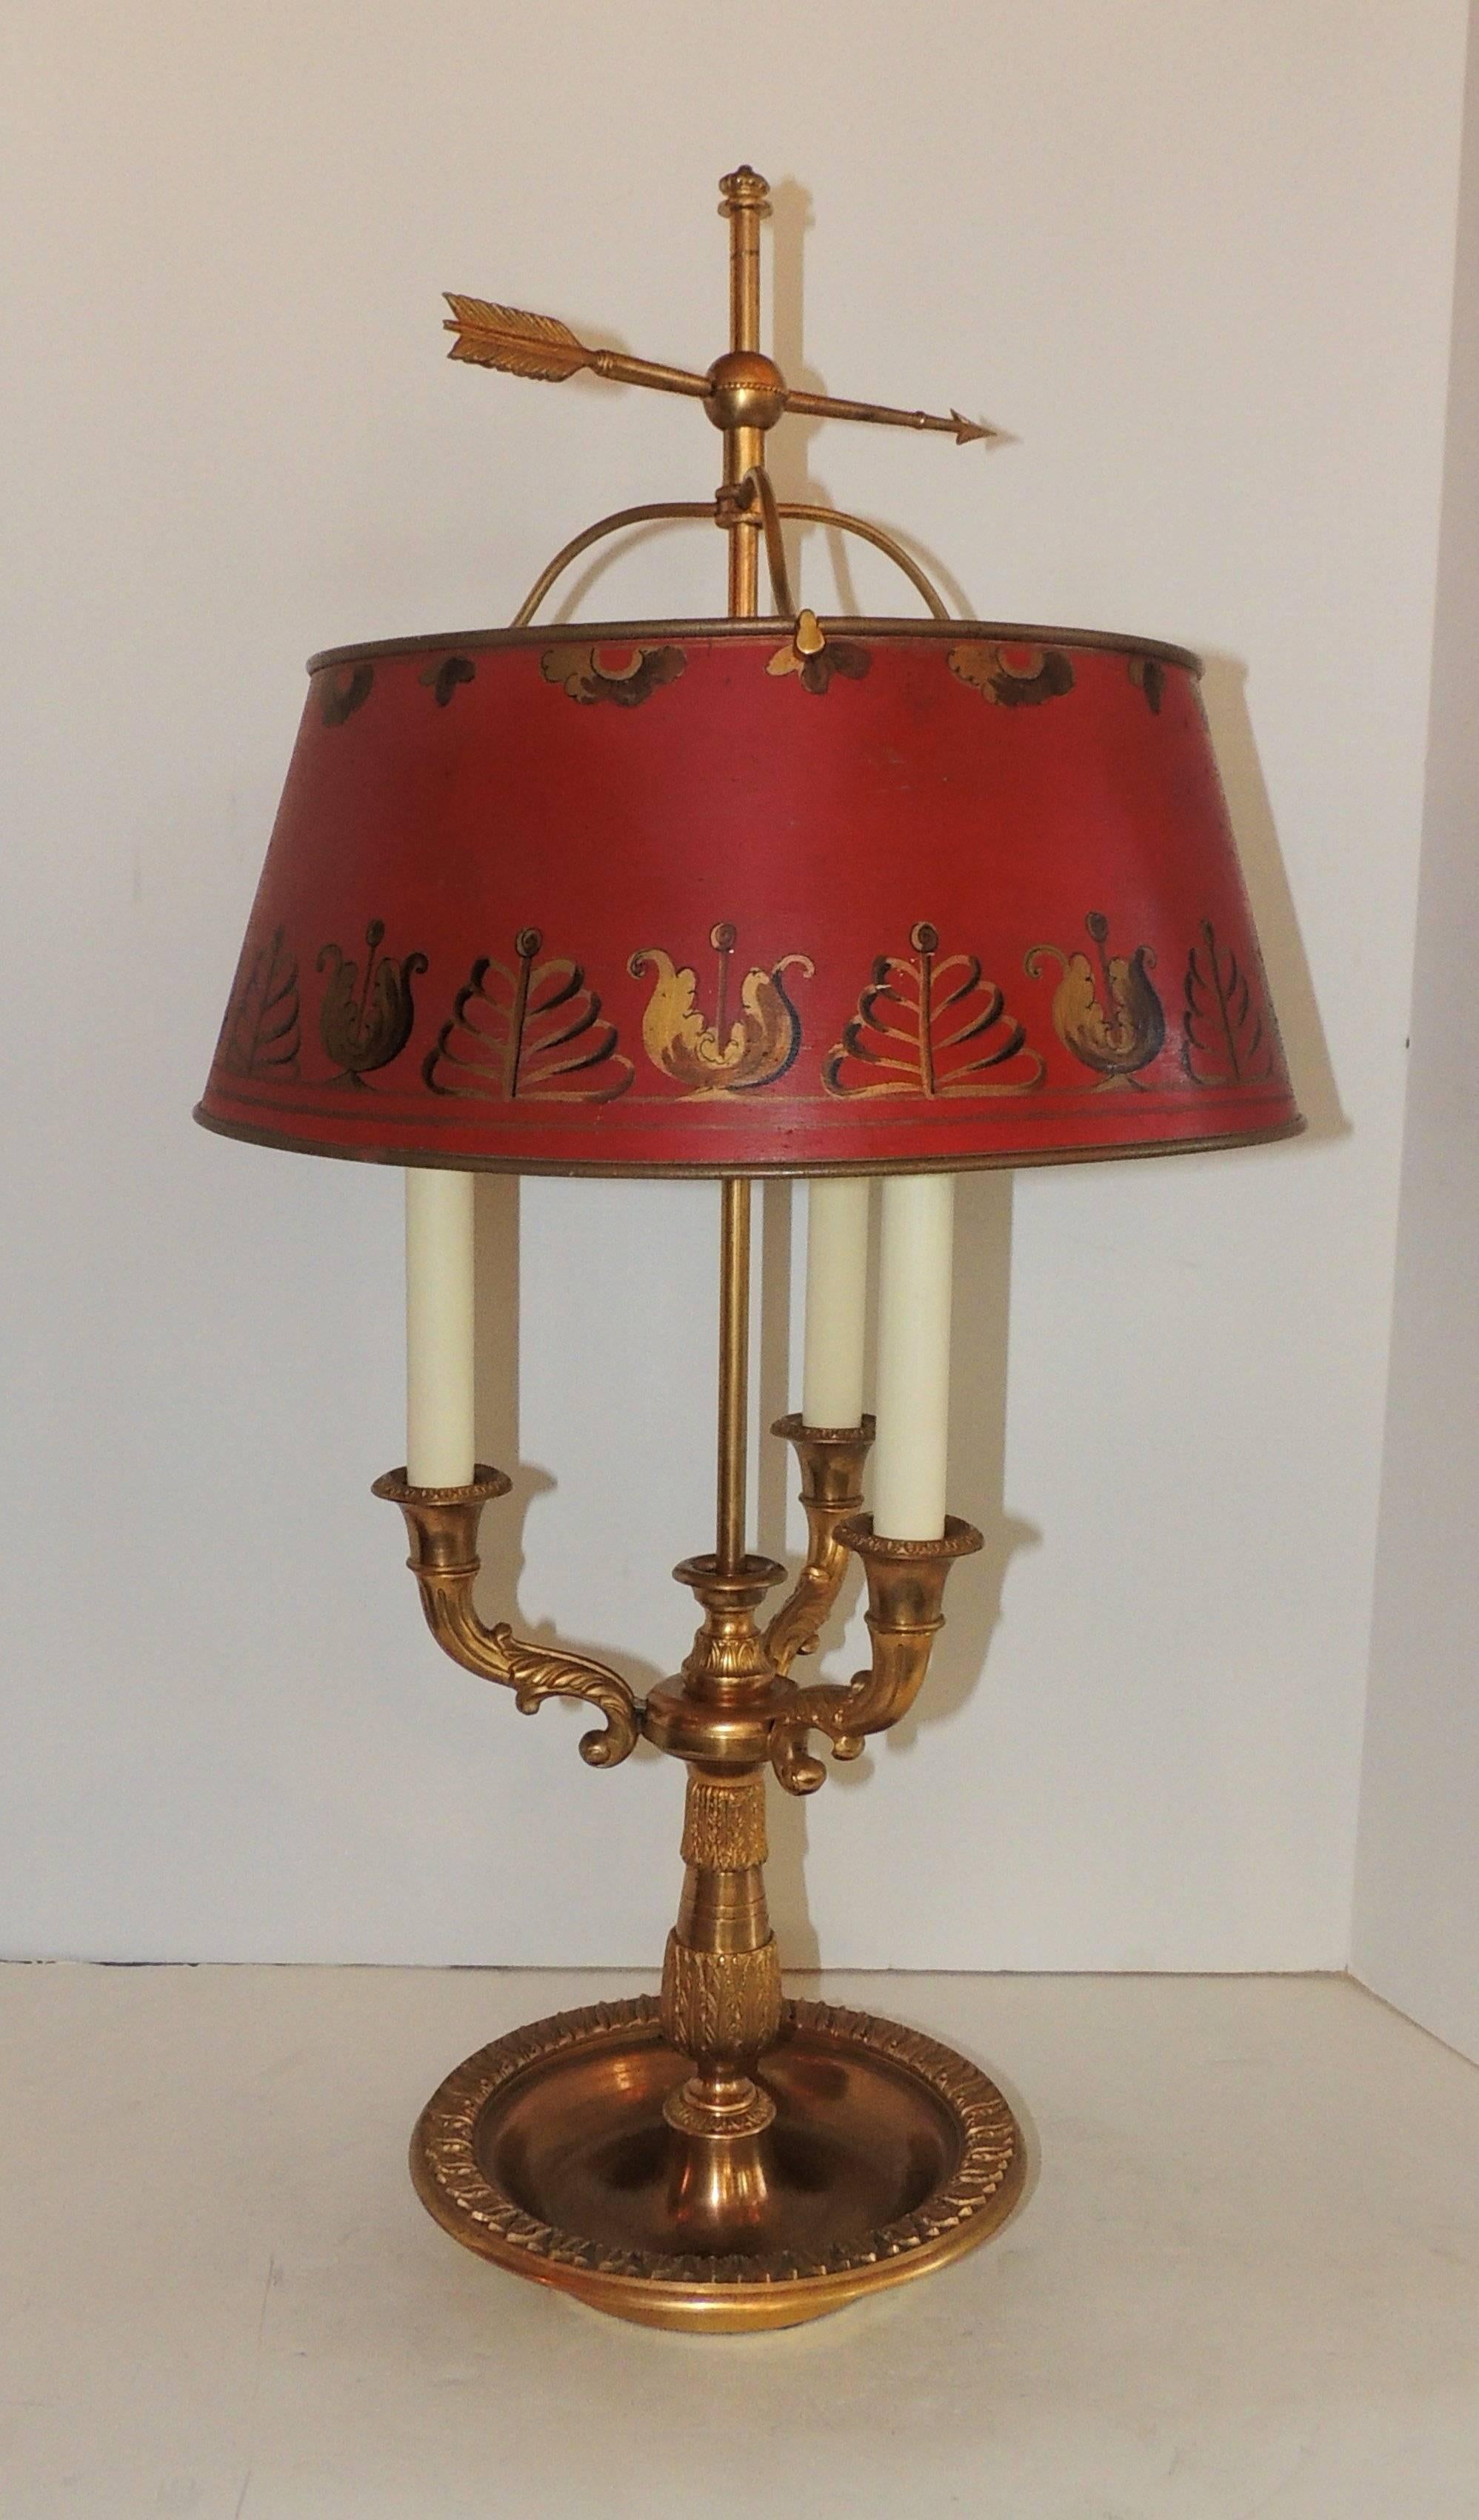 A wonderful pair of French bronze neoclassical Bouillotte lamp with three lights and decorated red tôle shade in the Regency motif.

Measures: Shade 14